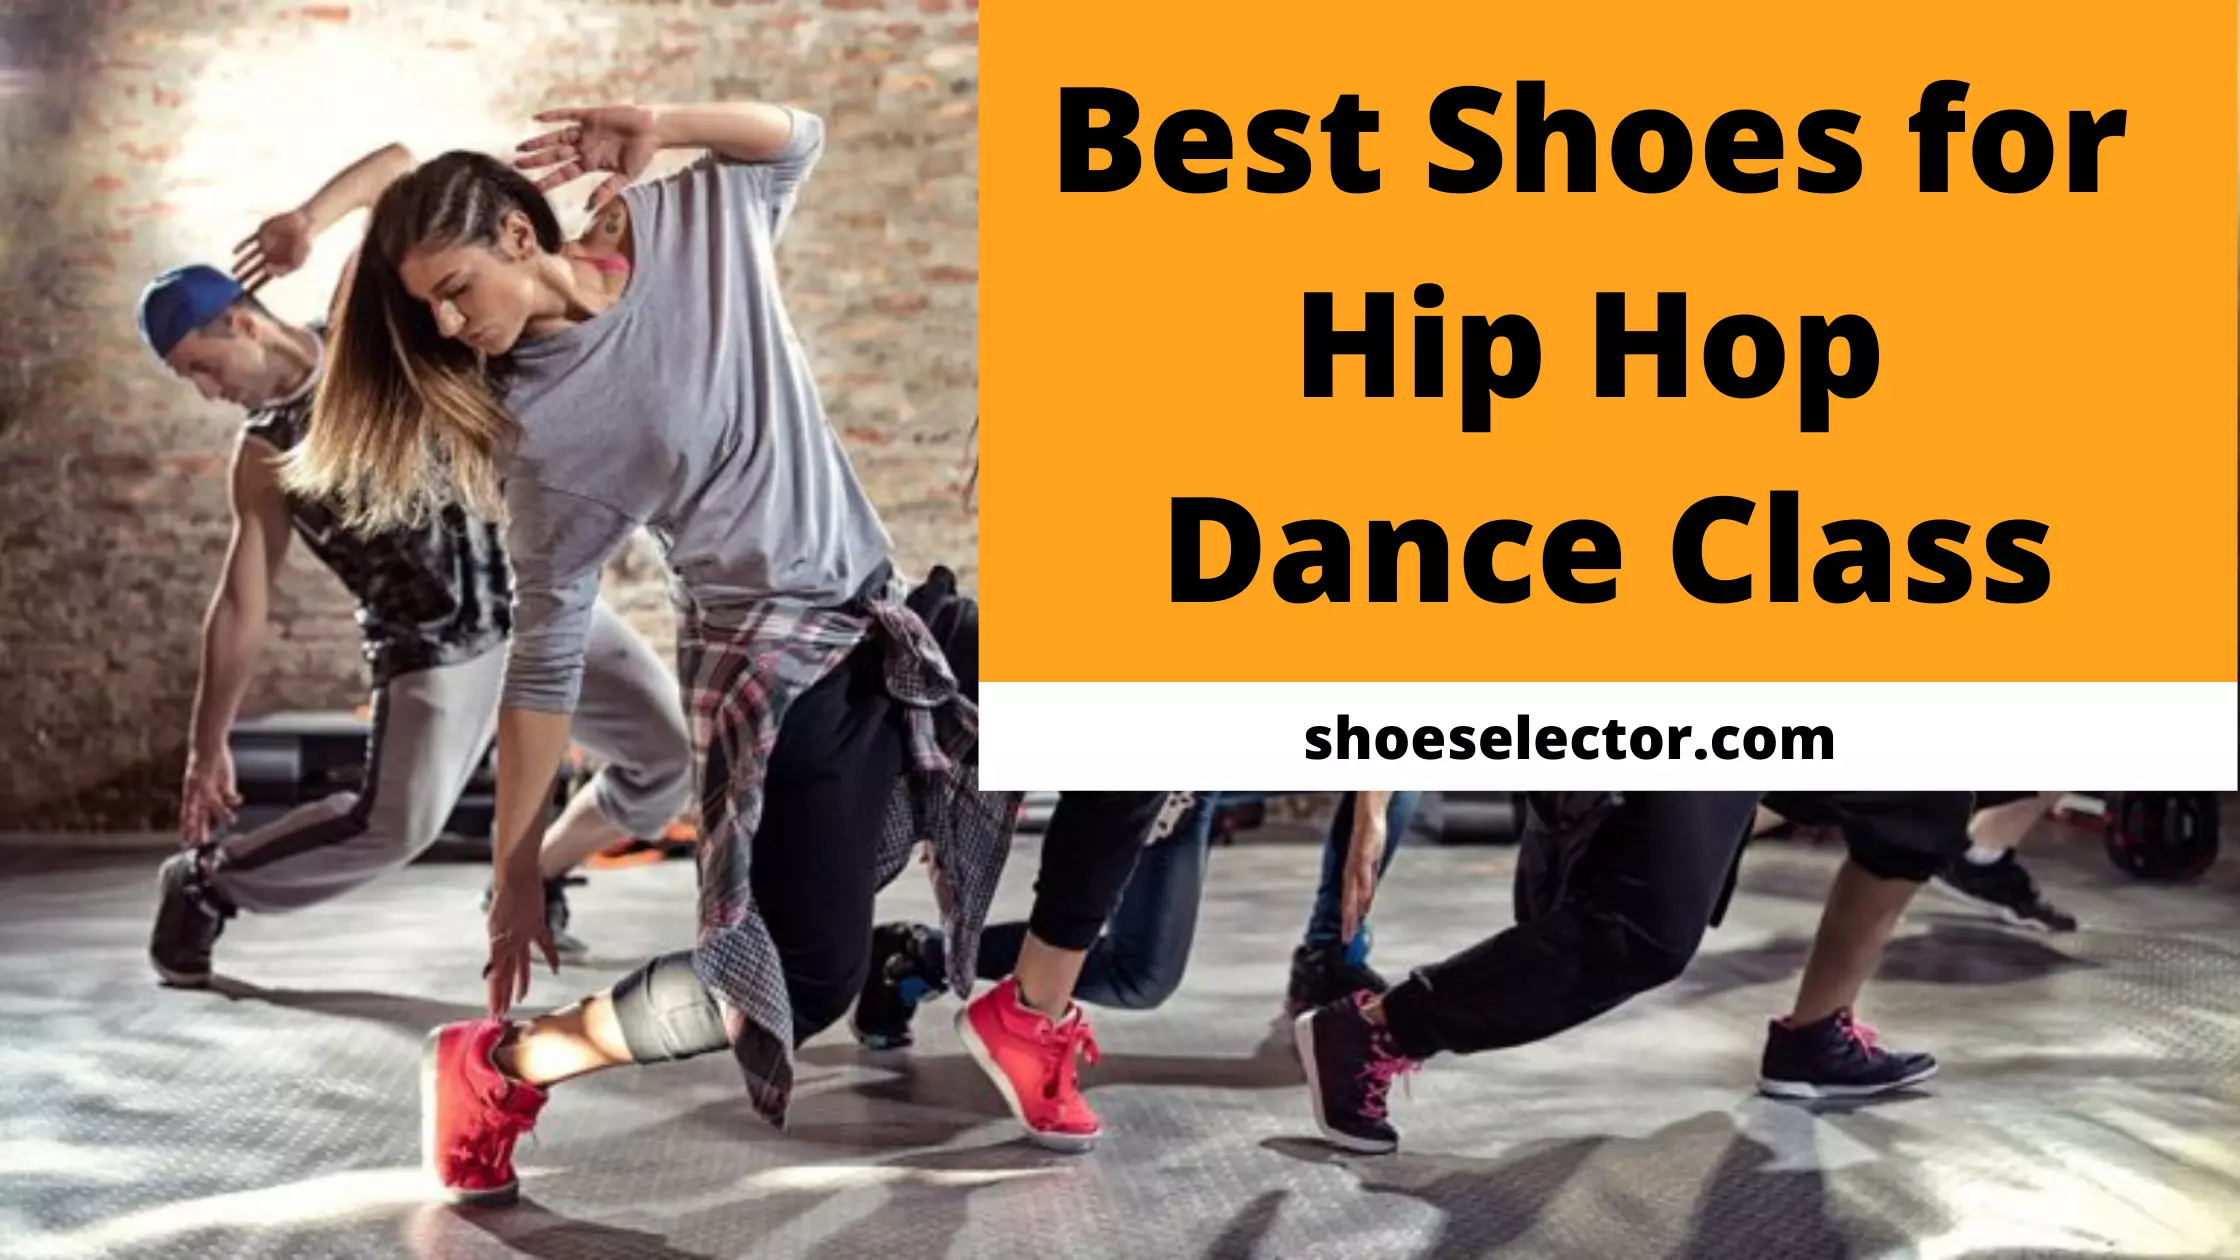 Best Shoes For Hip Hop Dance Class With Complete Details